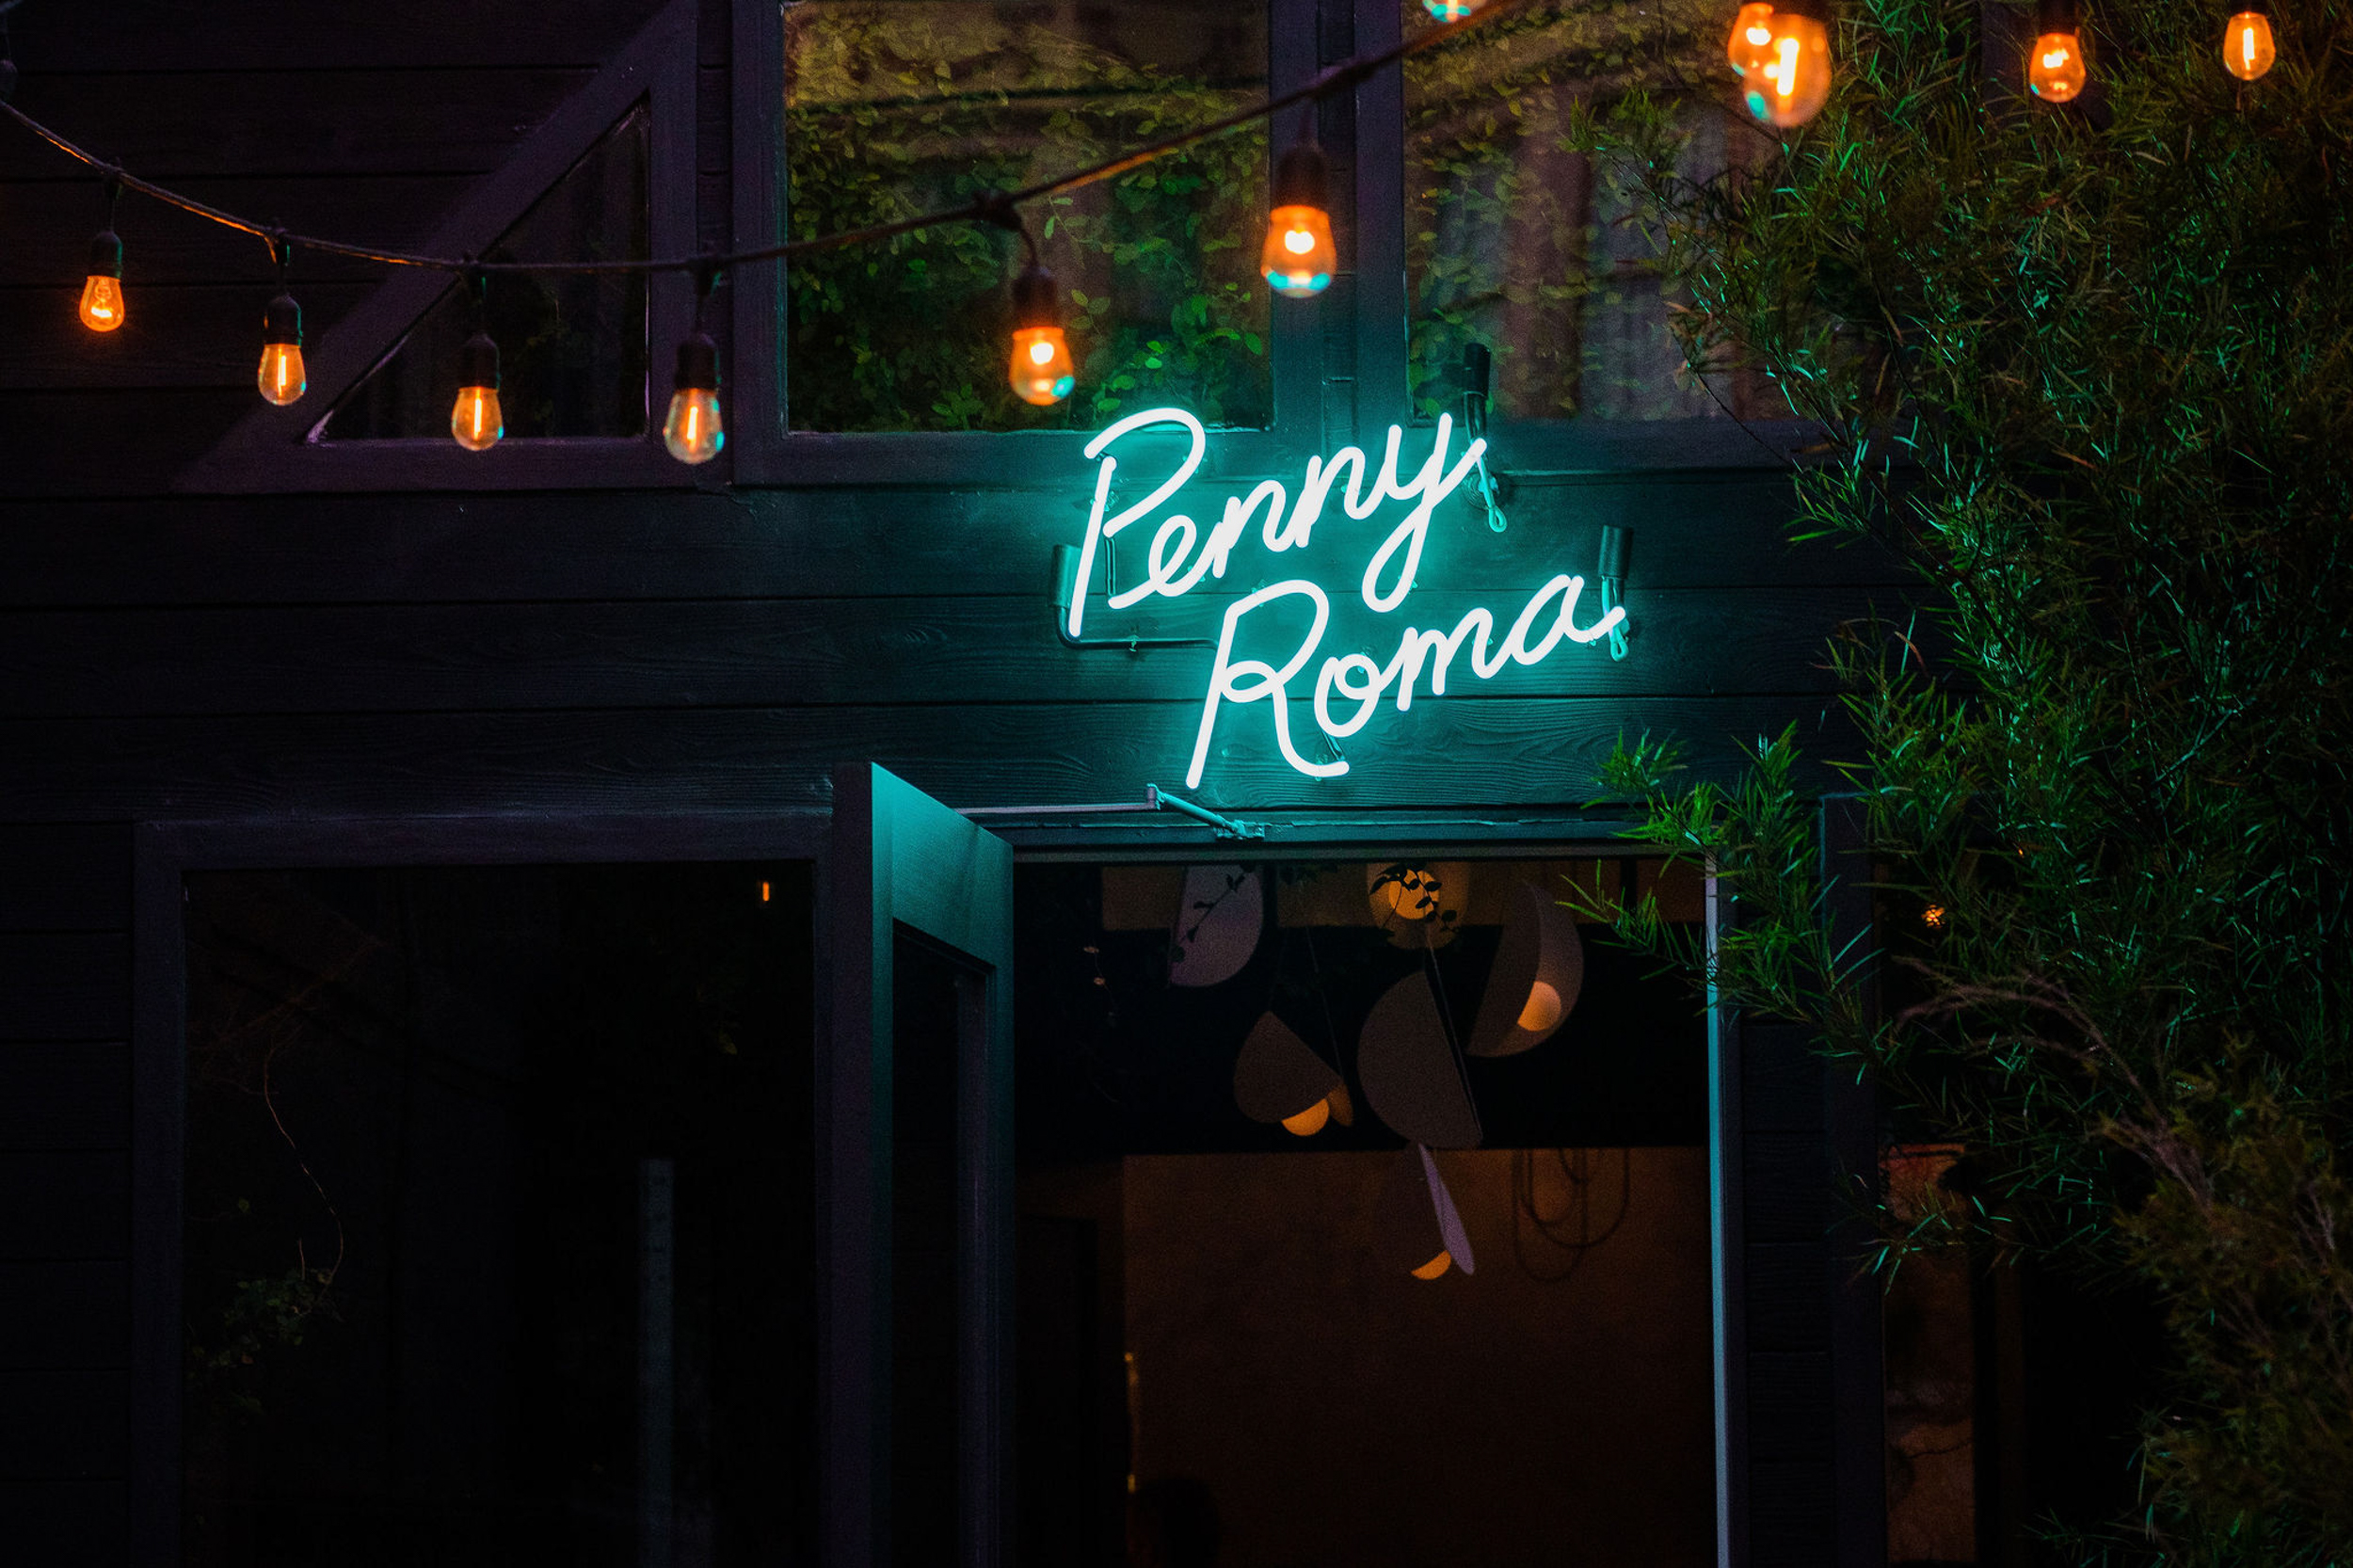 Penny Roma Impresses With ‘Edenic’ Ambiance & Freshly Made Pasta